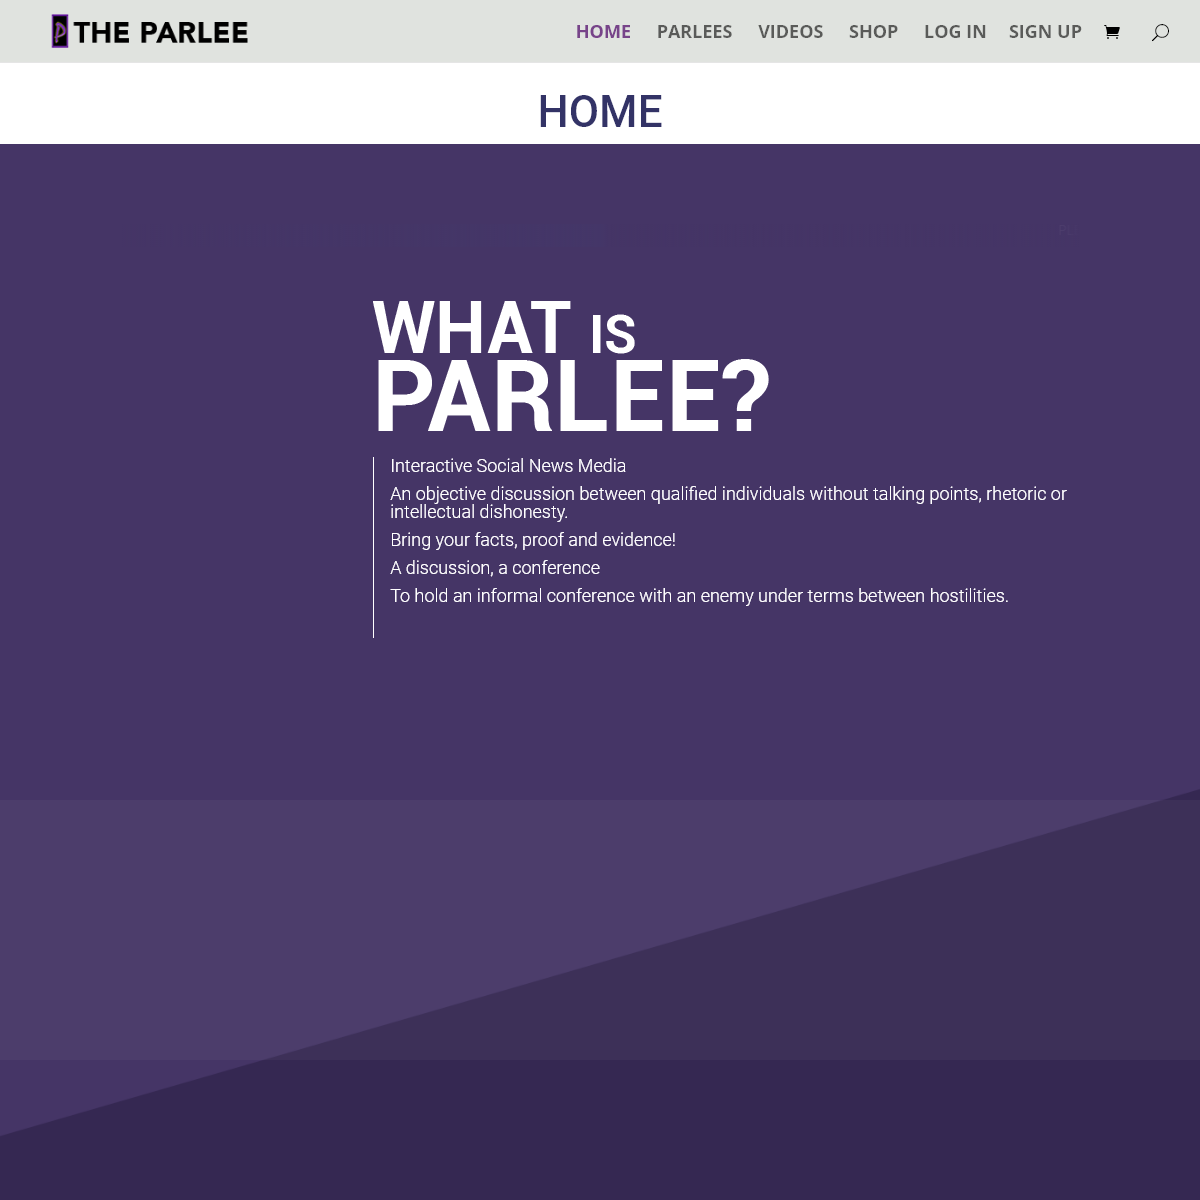 A complete backup of theparlee.com